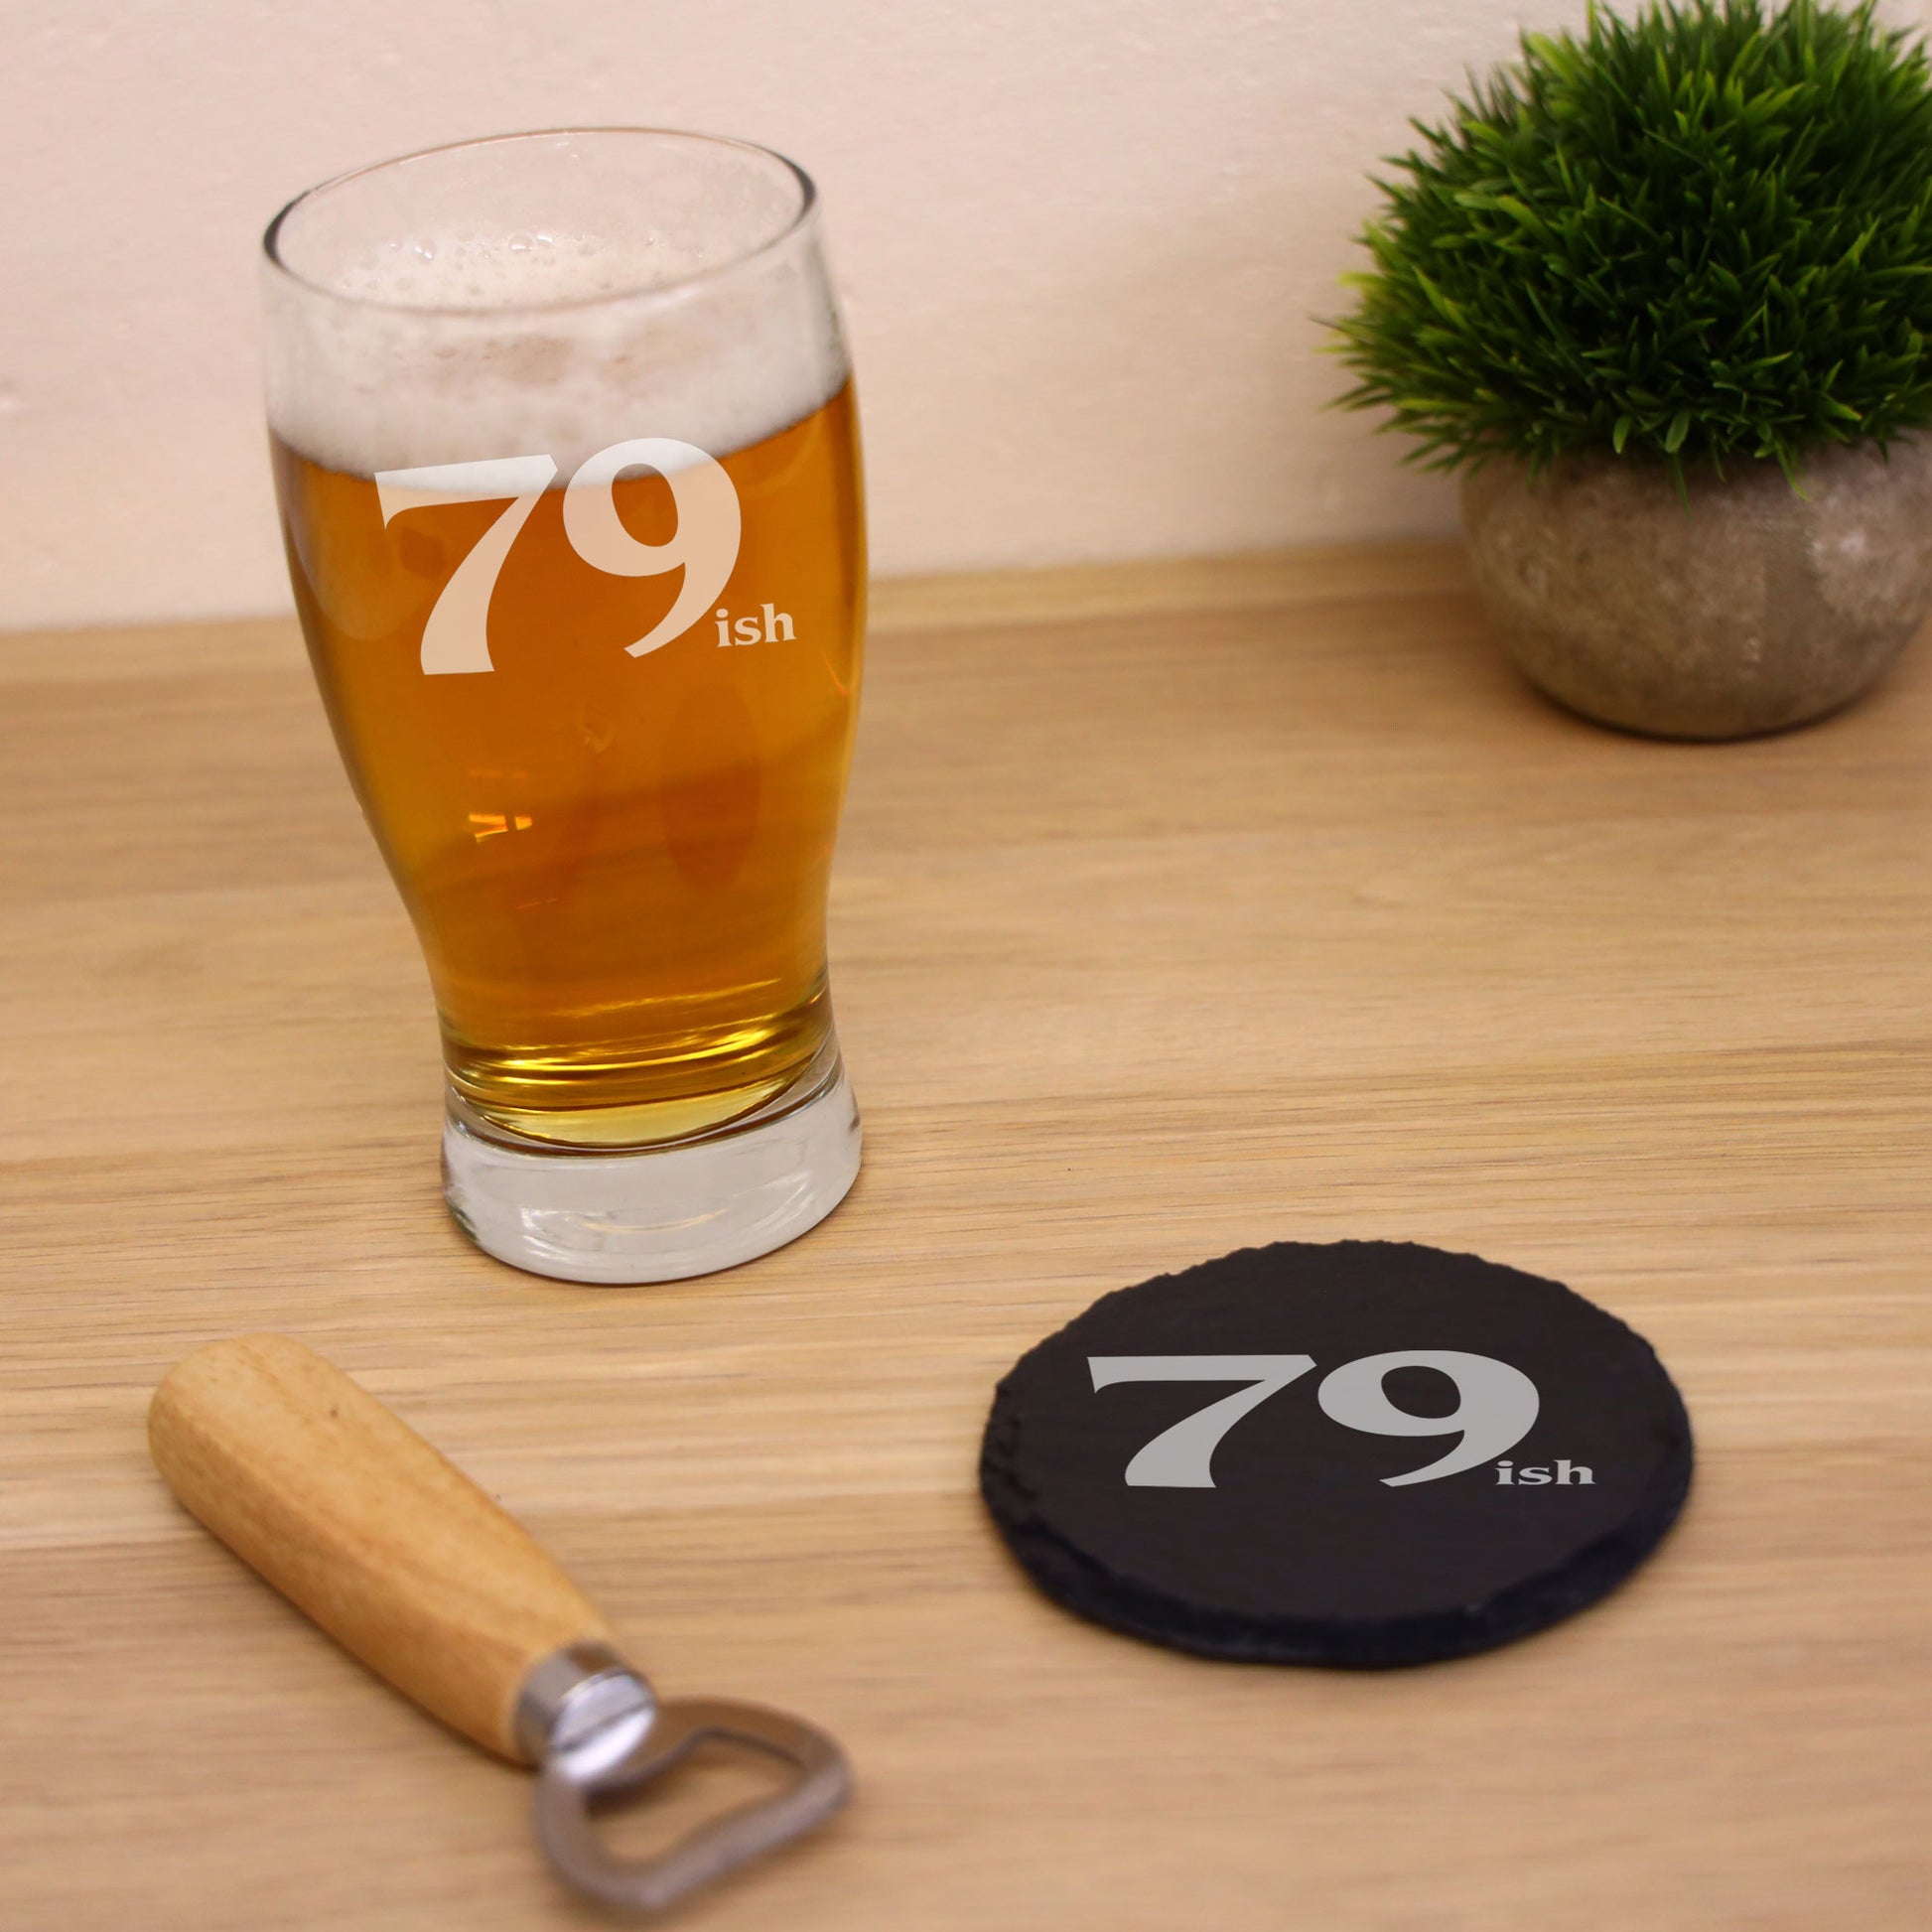 79ish Pint Glass and/or Coaster Set  - Always Looking Good - Glass & Round Coaster Set  